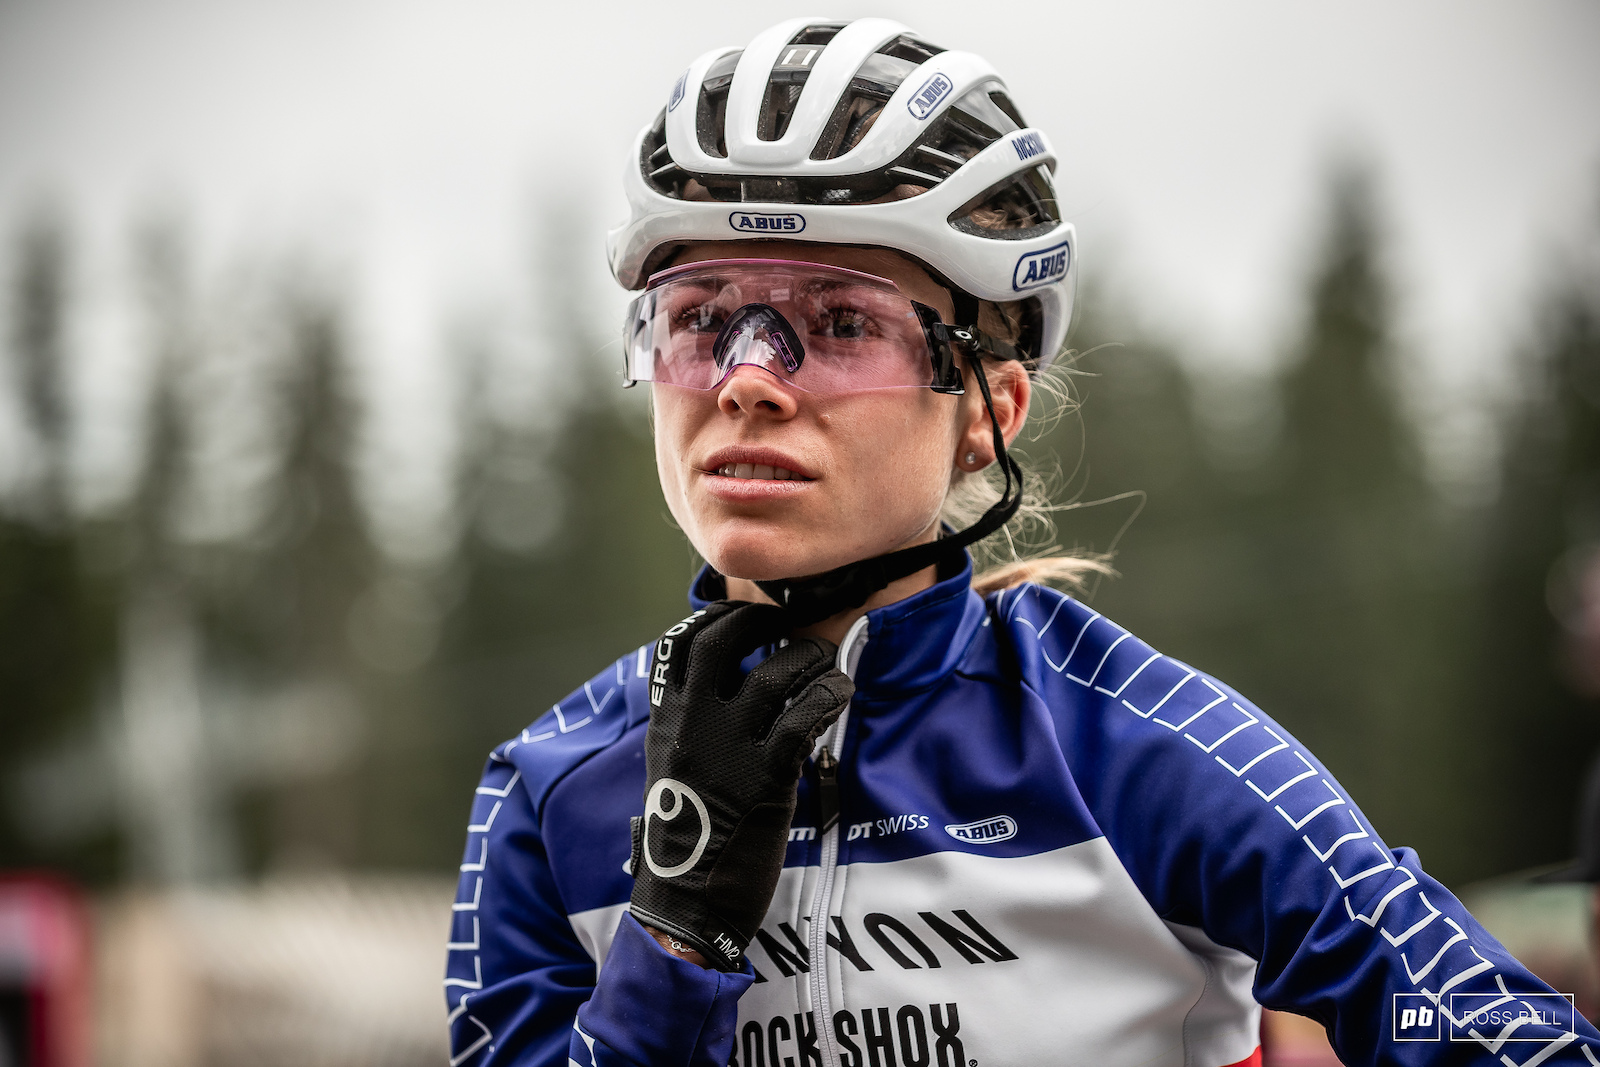 Loana Lecomte took her first win off the season last time out in Leogang and went back to back here in Lenzerheide.